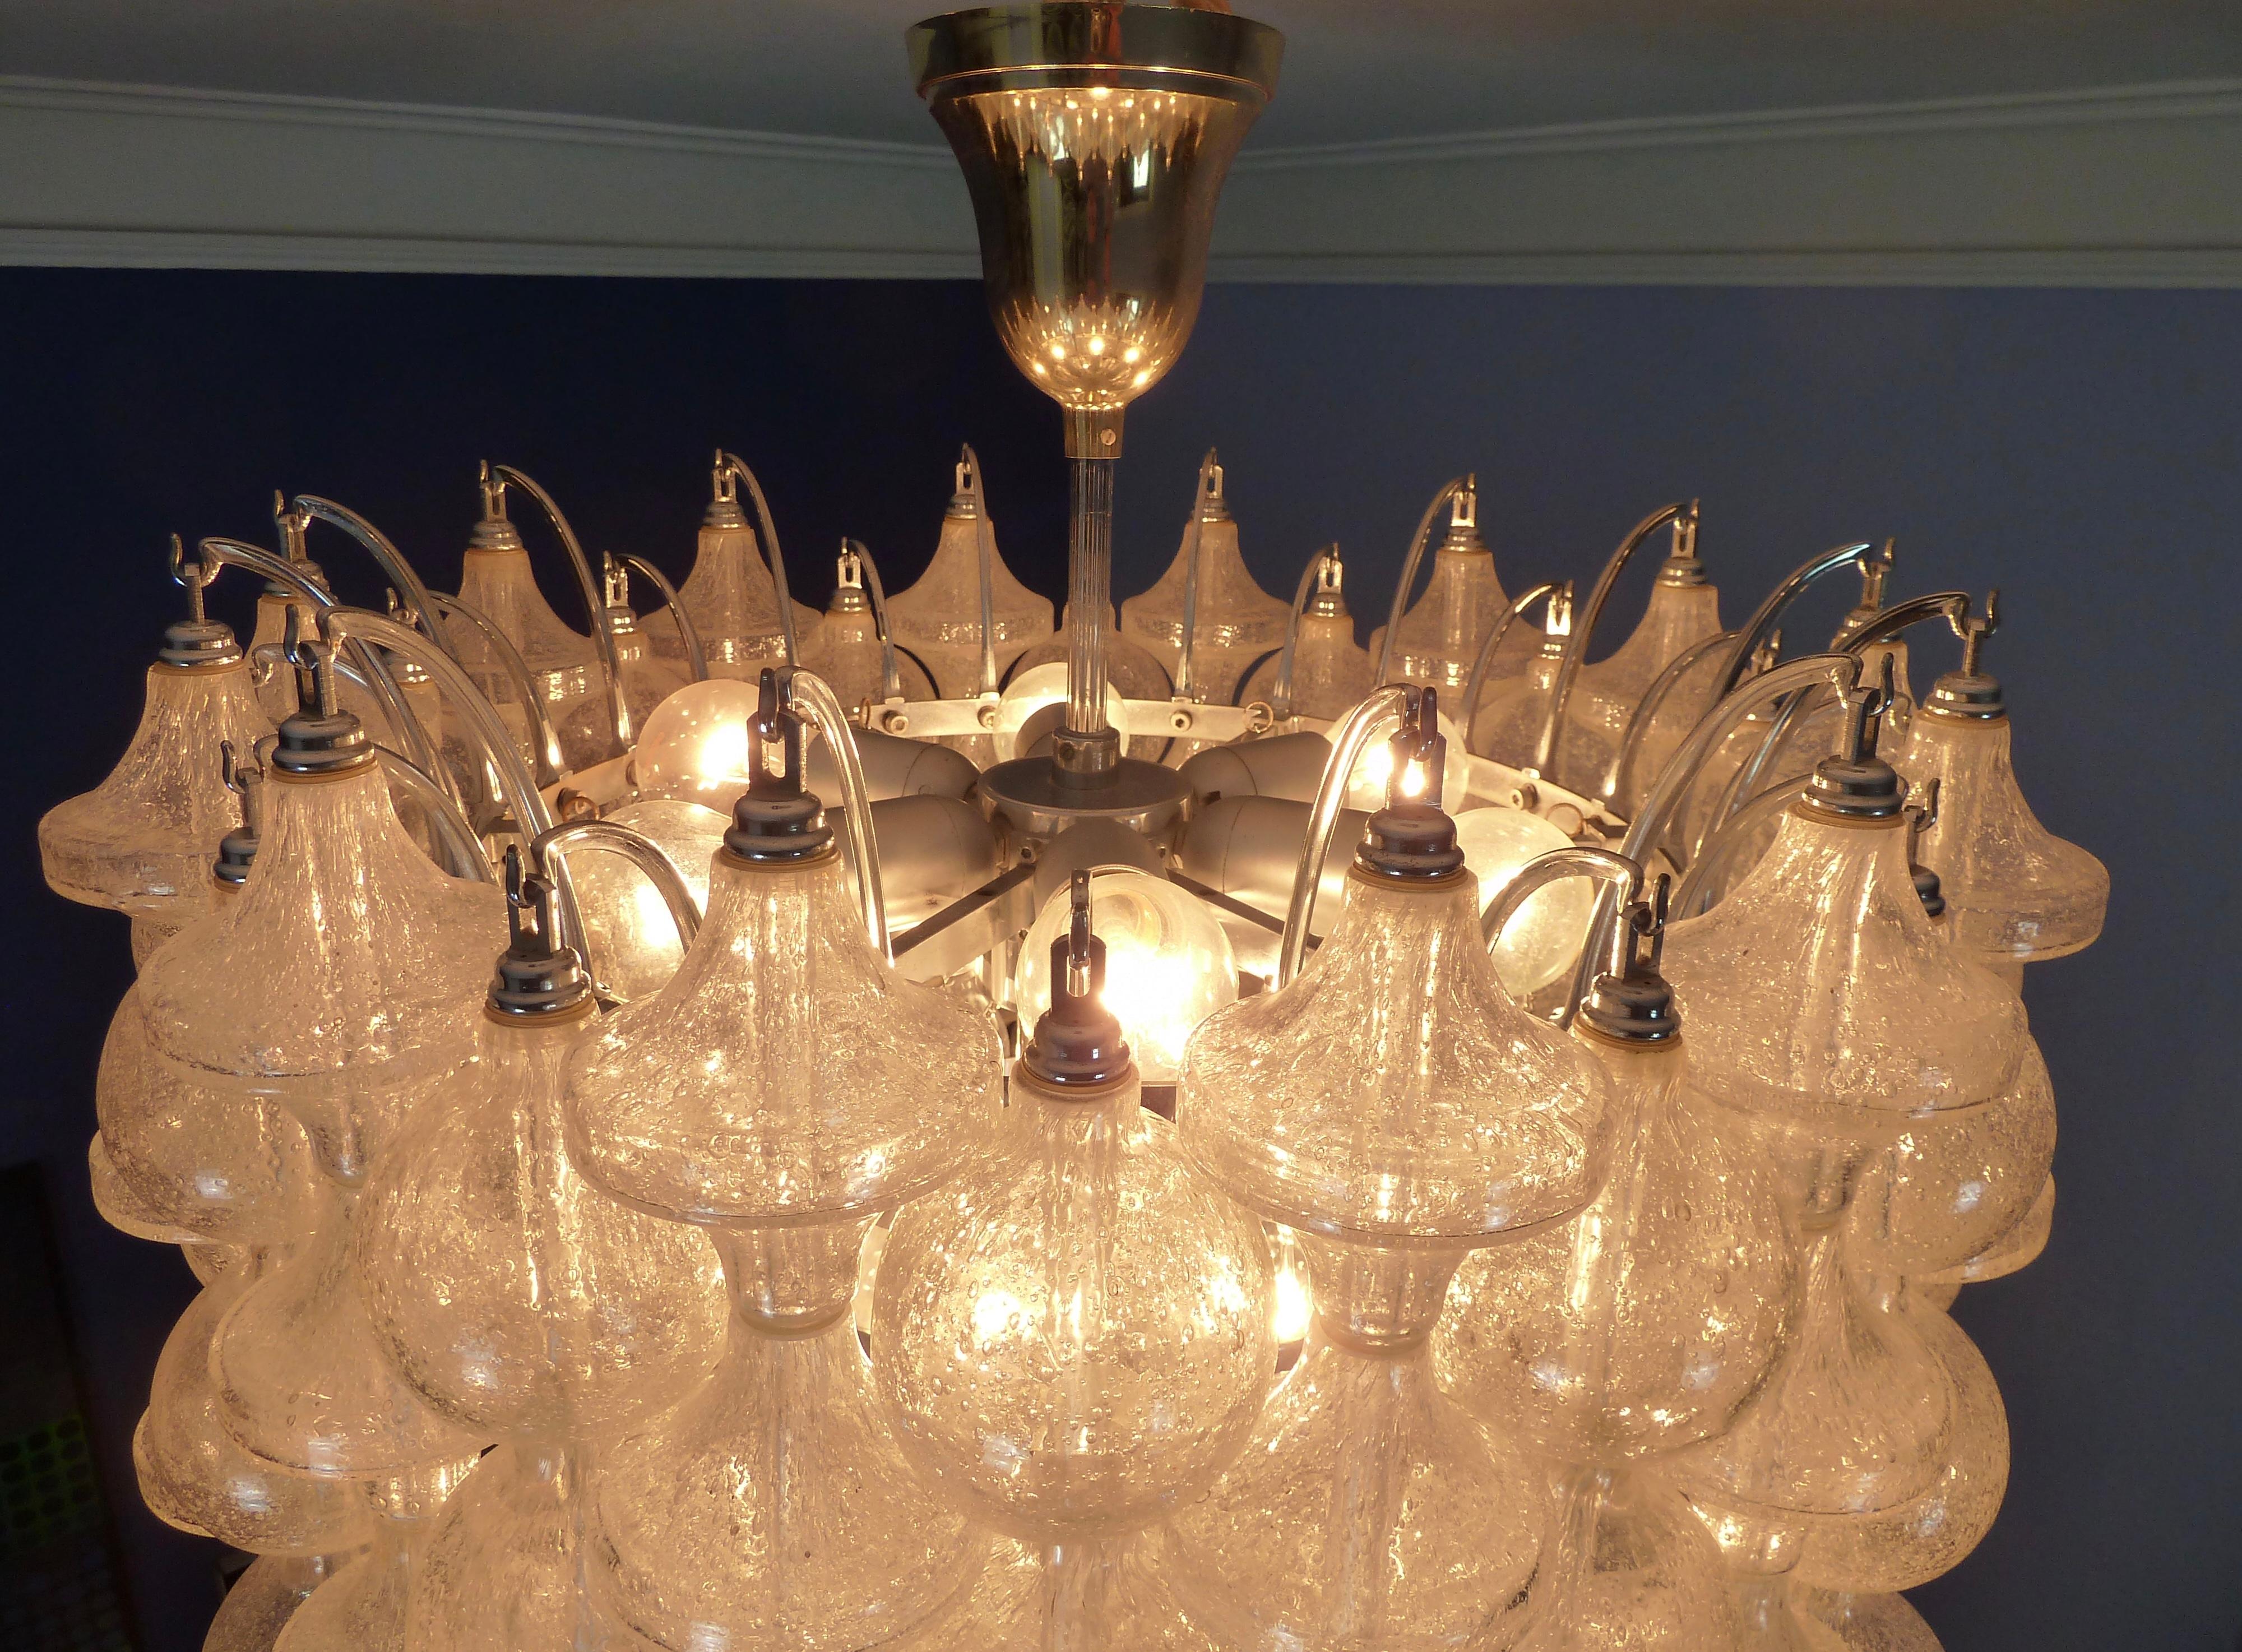 Rare Large and Bright 1970s Murano Seguso Ball Chandelier by OTT International For Sale 10